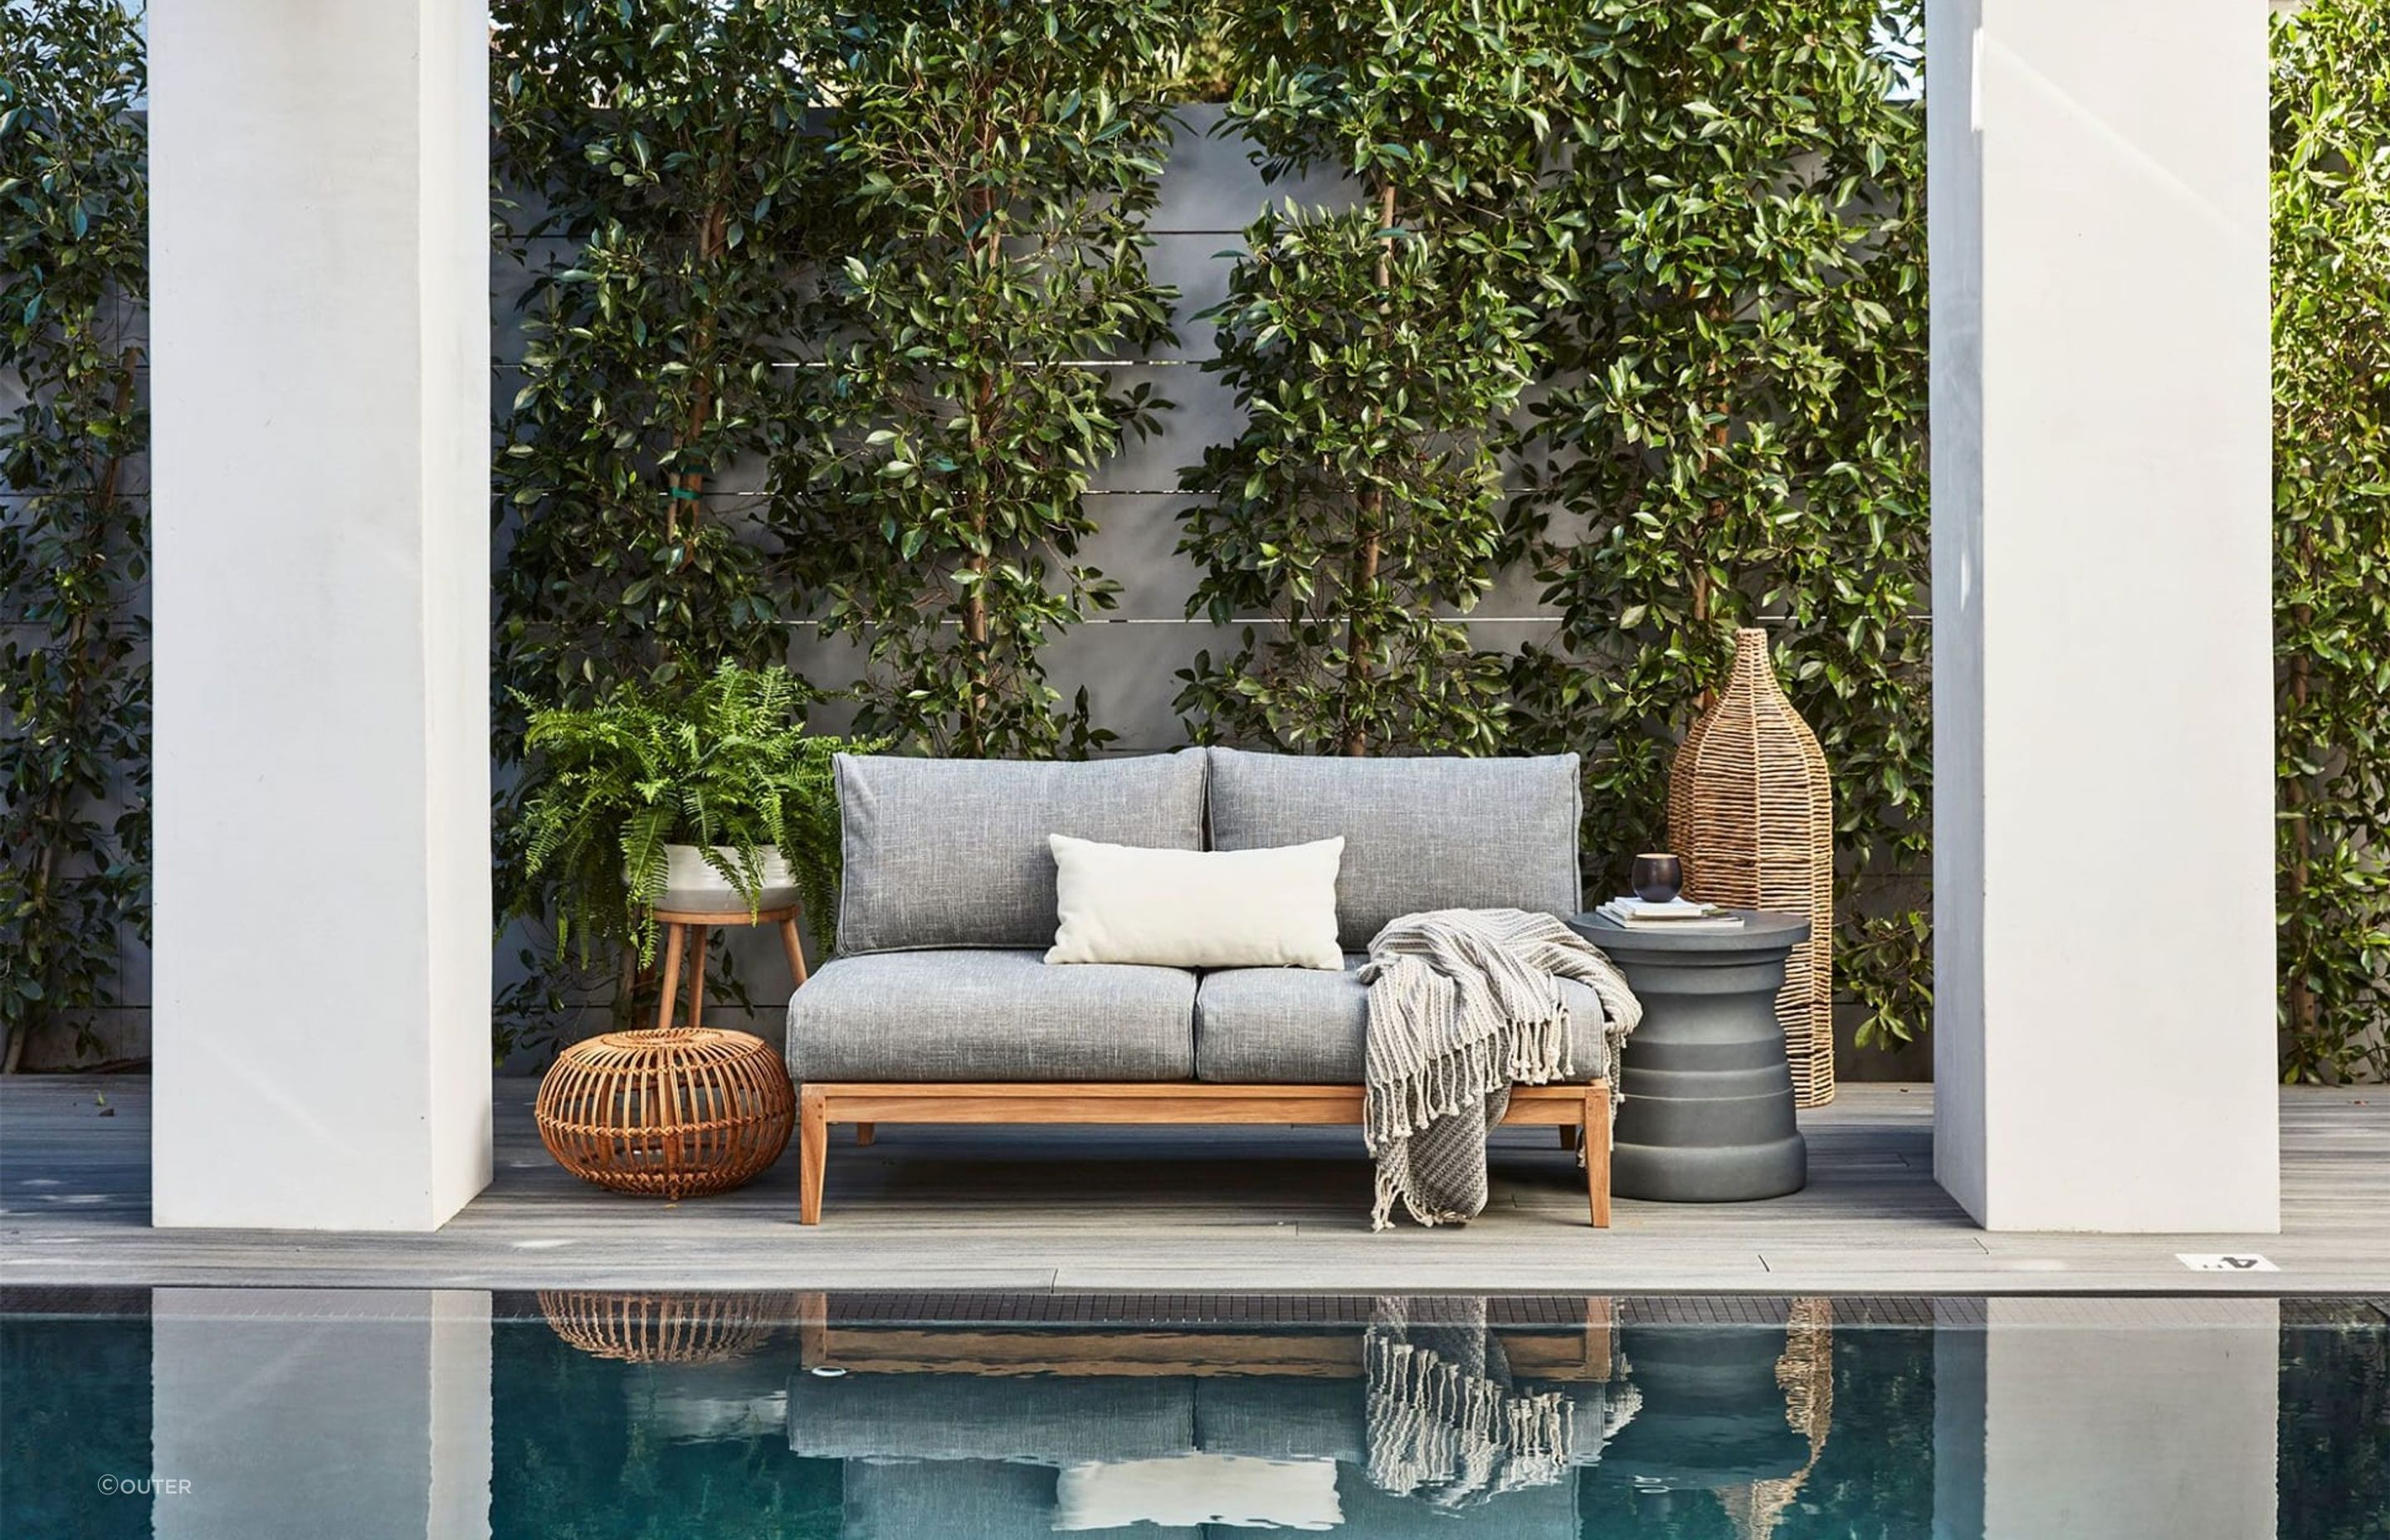 The plush Teak Outdoor Loveseat takes centre stage in a scene that completely embodies comfort